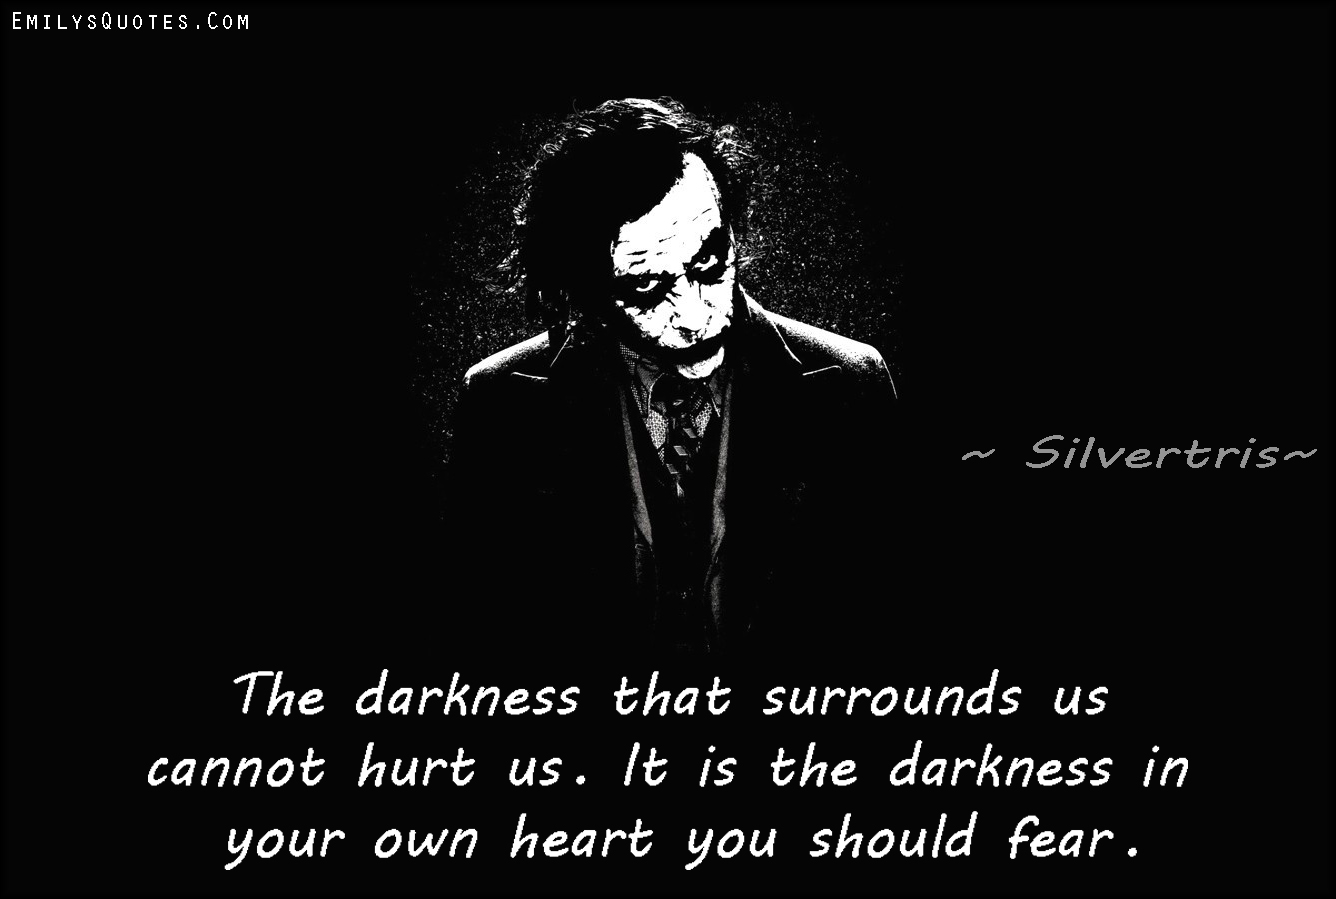 The darkness that surrounds us cannot hurt us. It is the darkness in your own heart you should fear